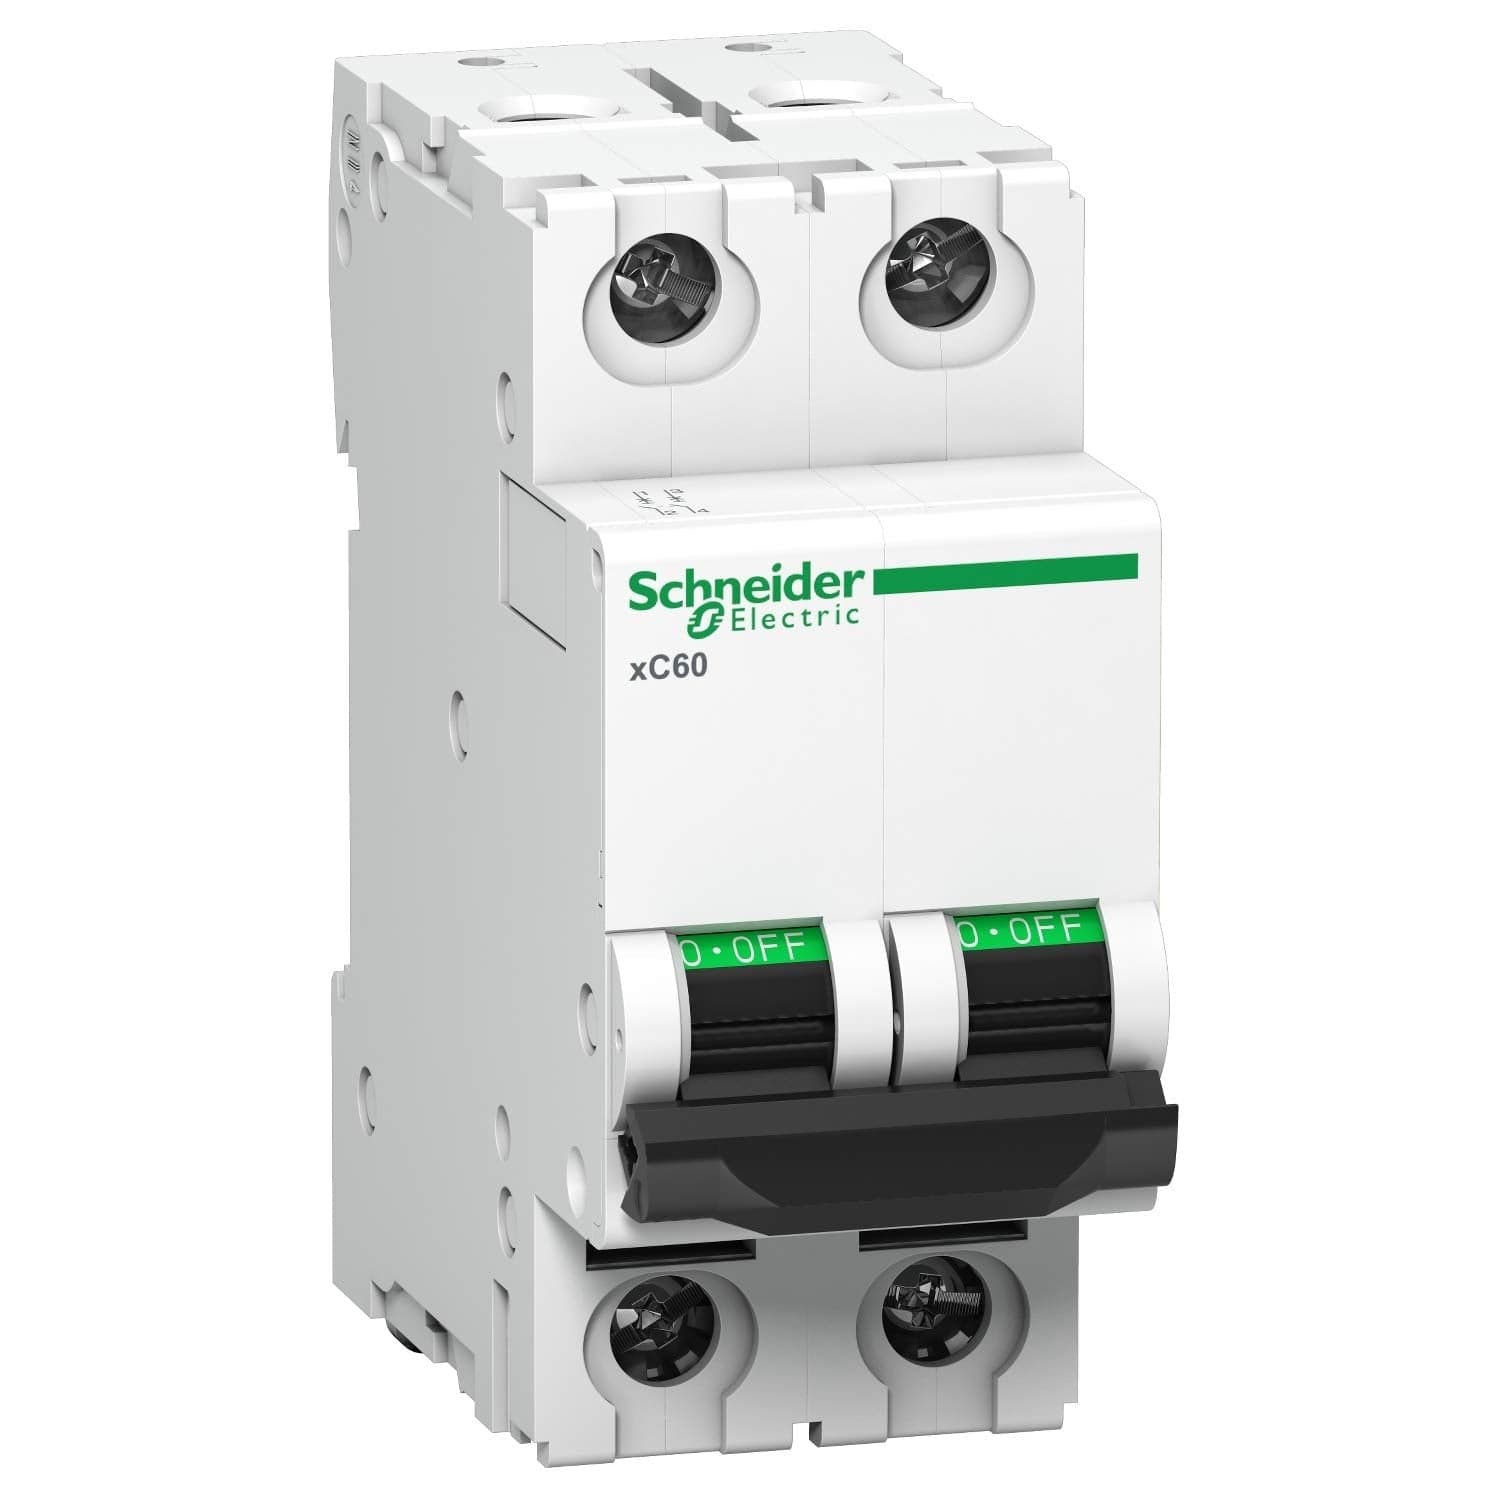 Schneider 1-Pole Miniature Circuit Breaker - Buy Online for Precise Circuit Protection at Supply Master Power Management & Protection Buy Tools hardware Building materials